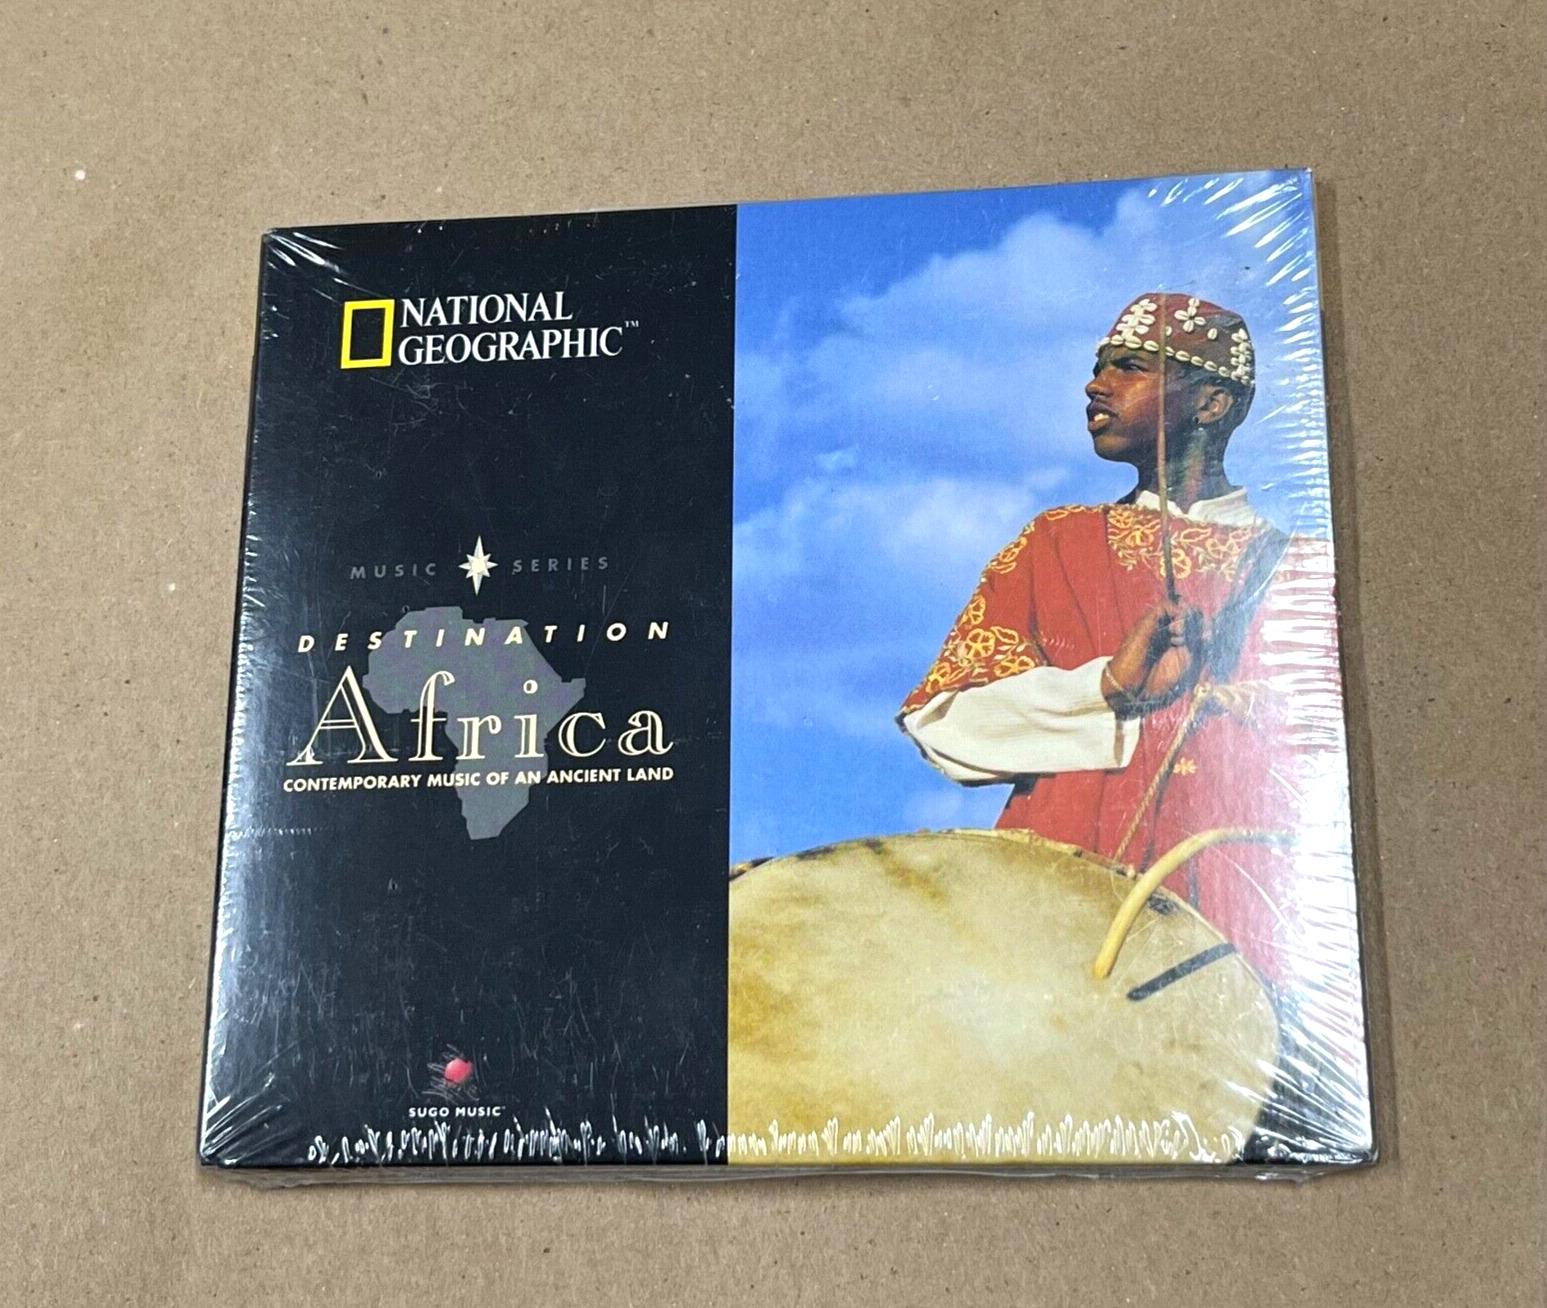 National Geographic CD Destination Africa Contemporary Music of an Ancient Land